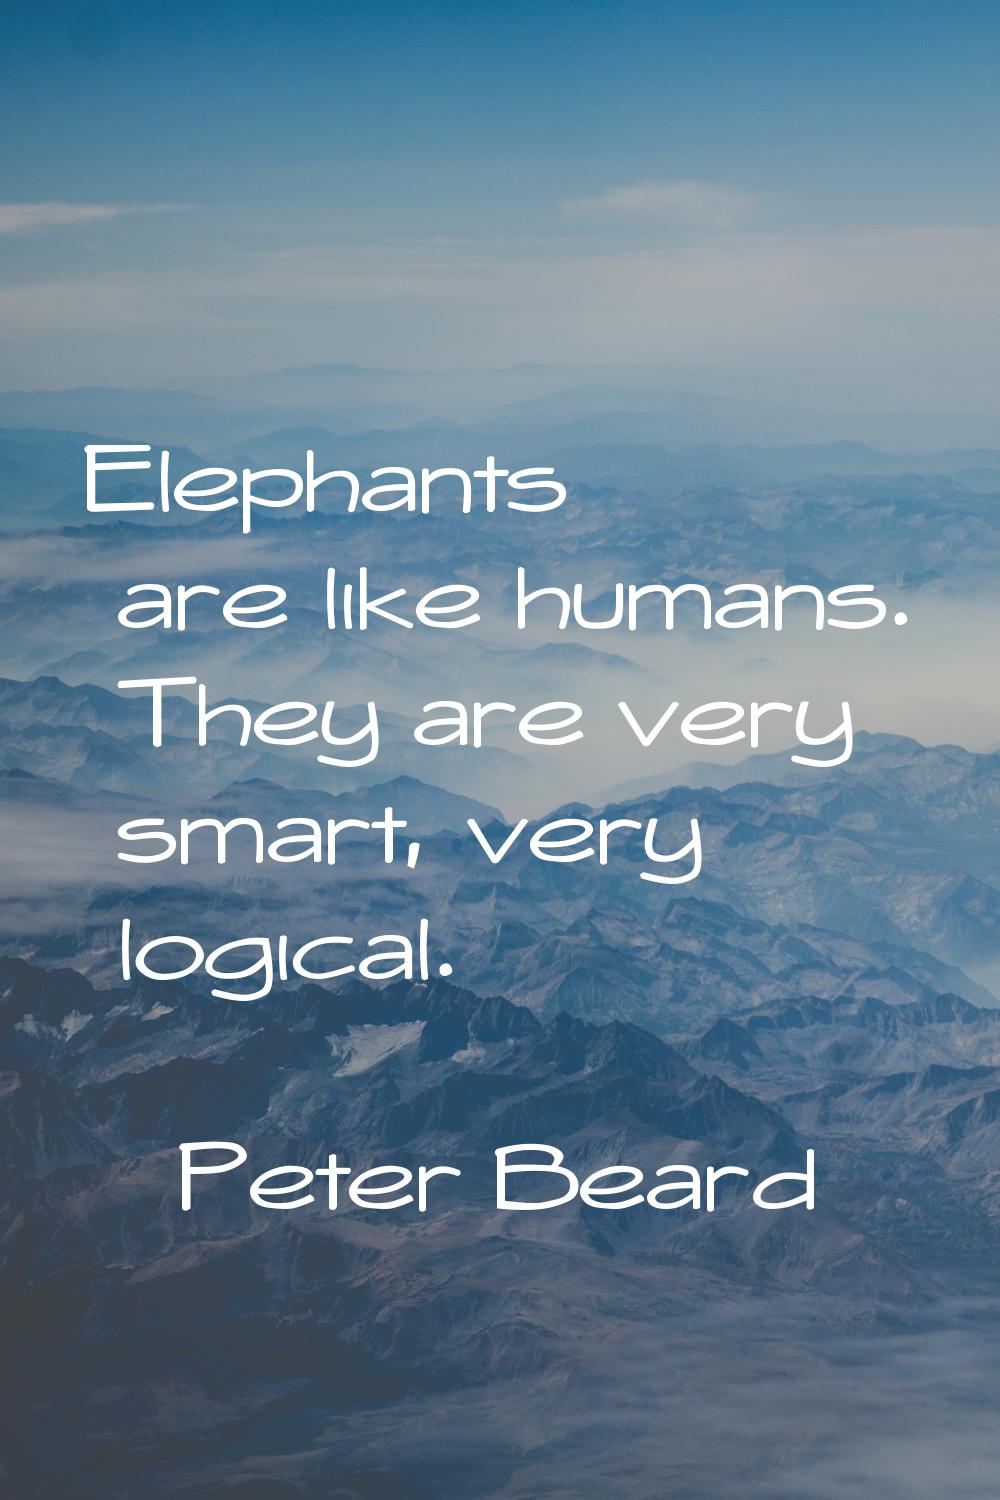 Elephants are like humans. They are very smart, very logical.